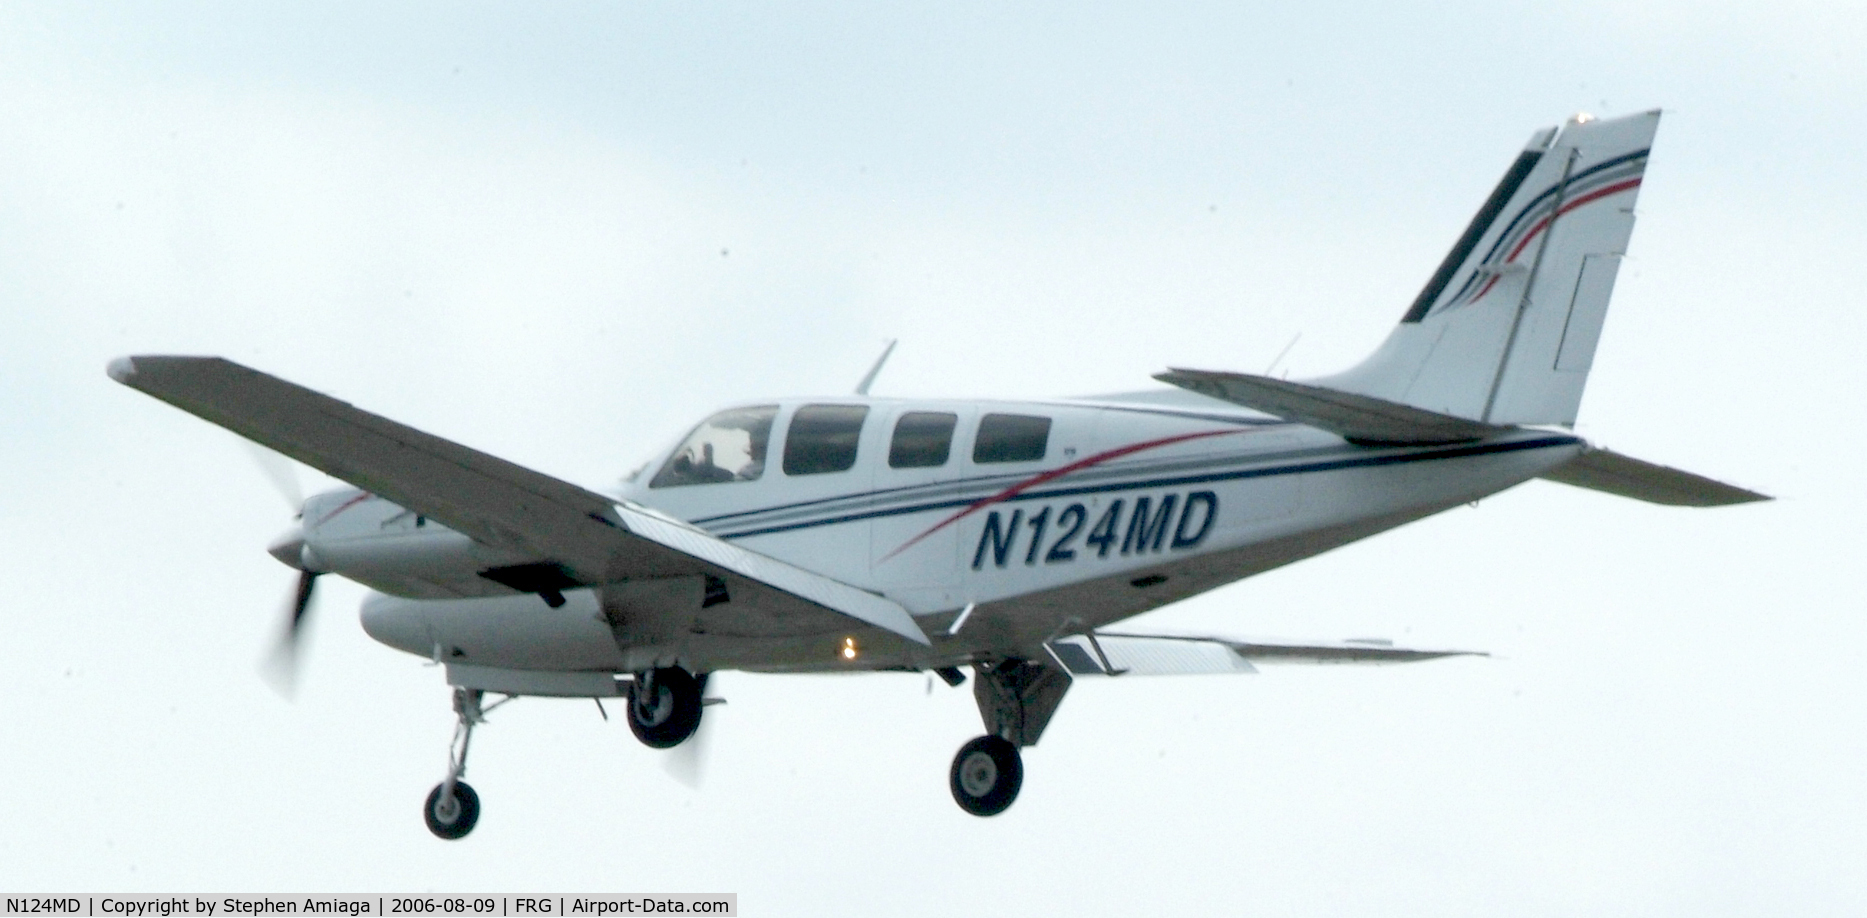 N124MD, 1981 Beech 58P Baron C/N TJ-374, About to touch down..